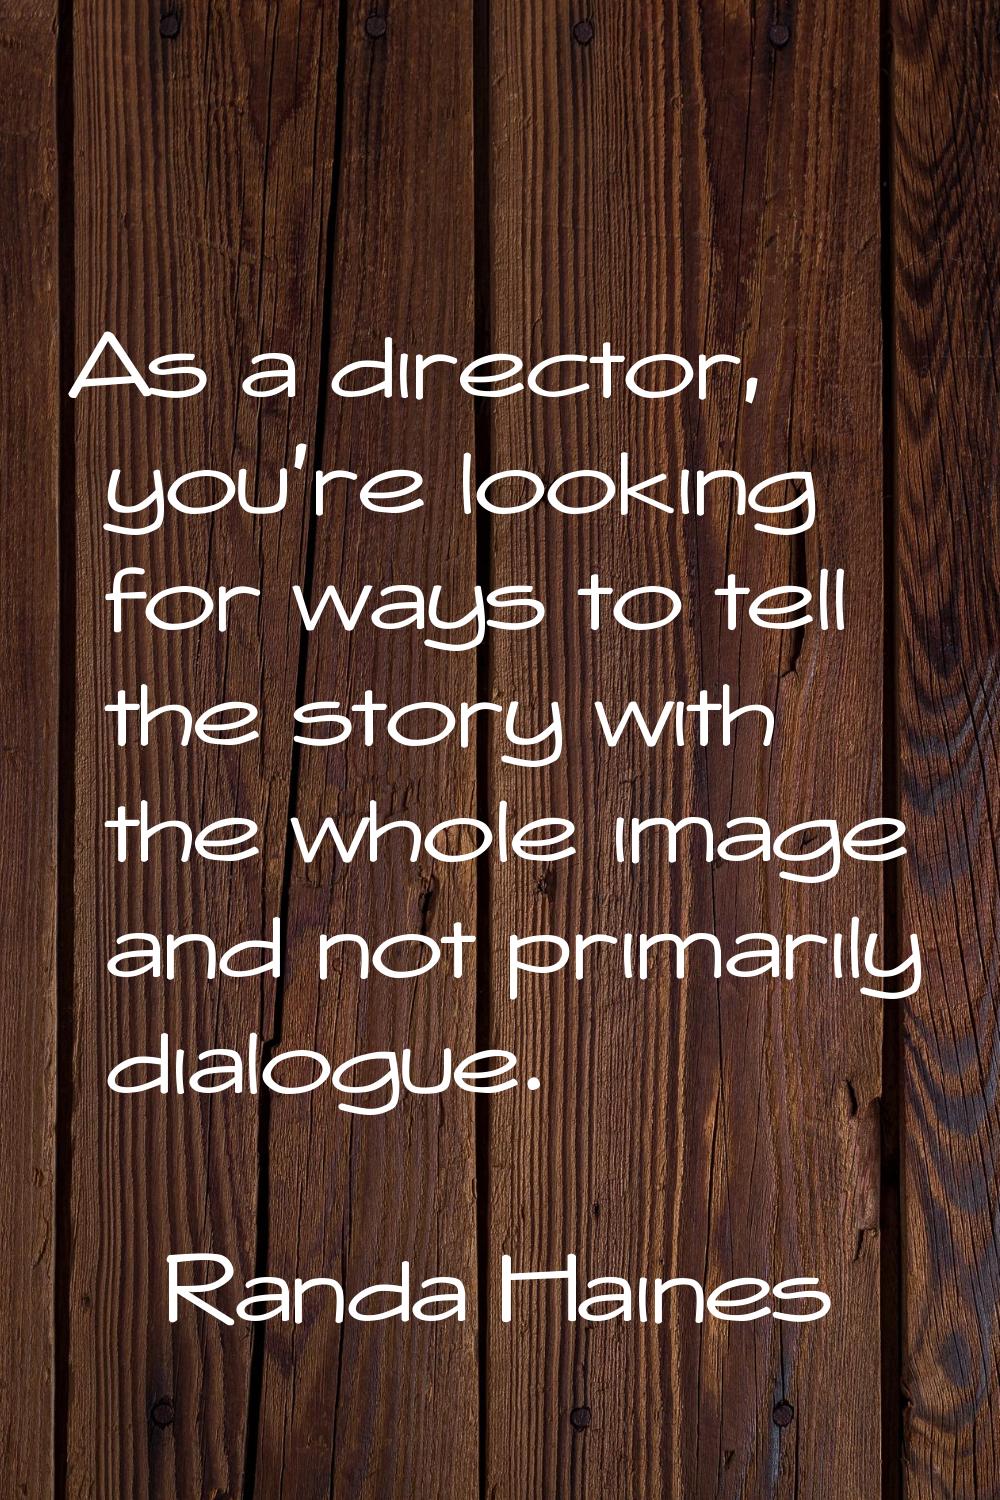 As a director, you're looking for ways to tell the story with the whole image and not primarily dia